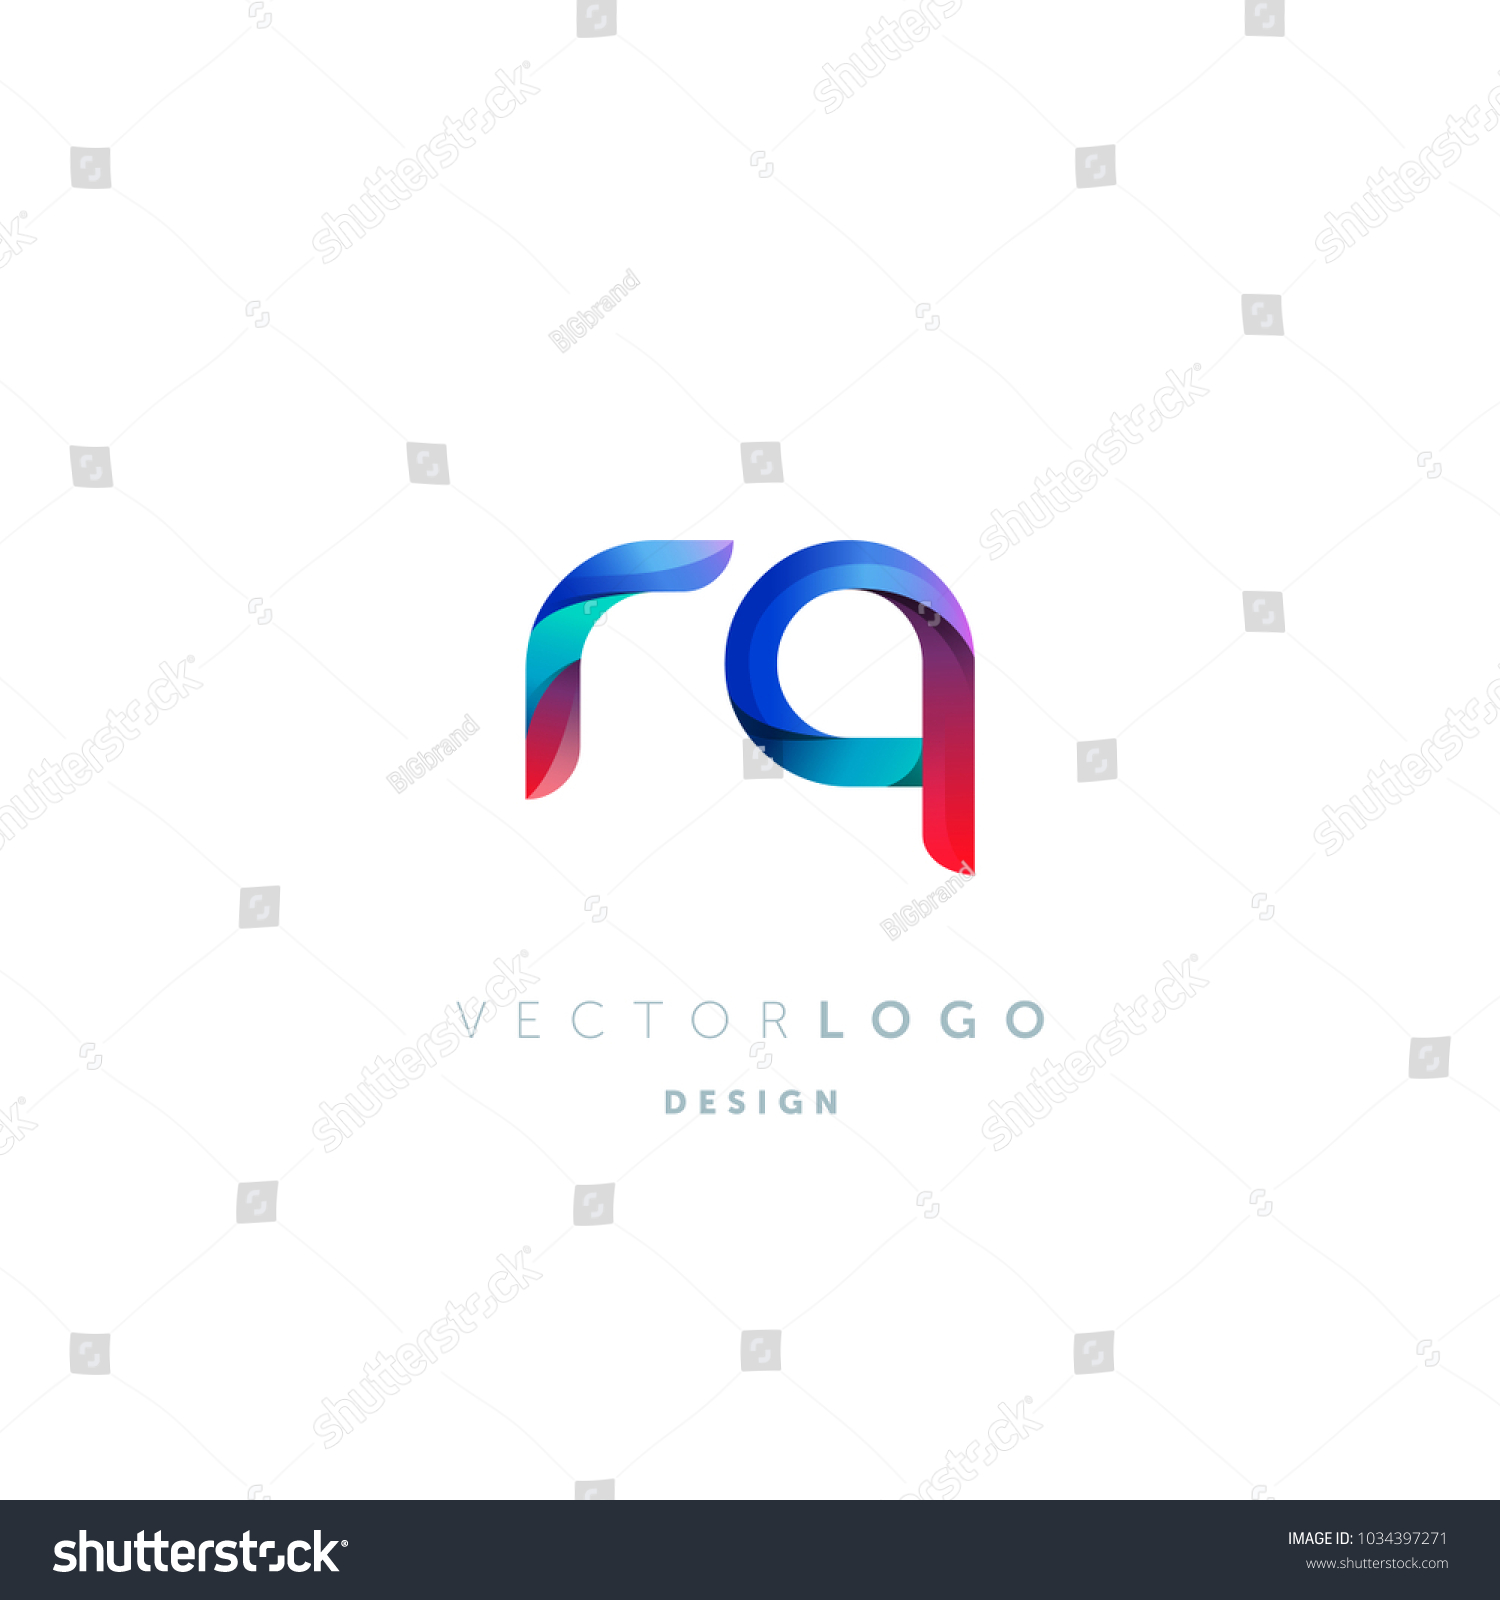 Letters R Q R Q Logo Stock Vector (Royalty Free) 1034397271 | Shutterstock